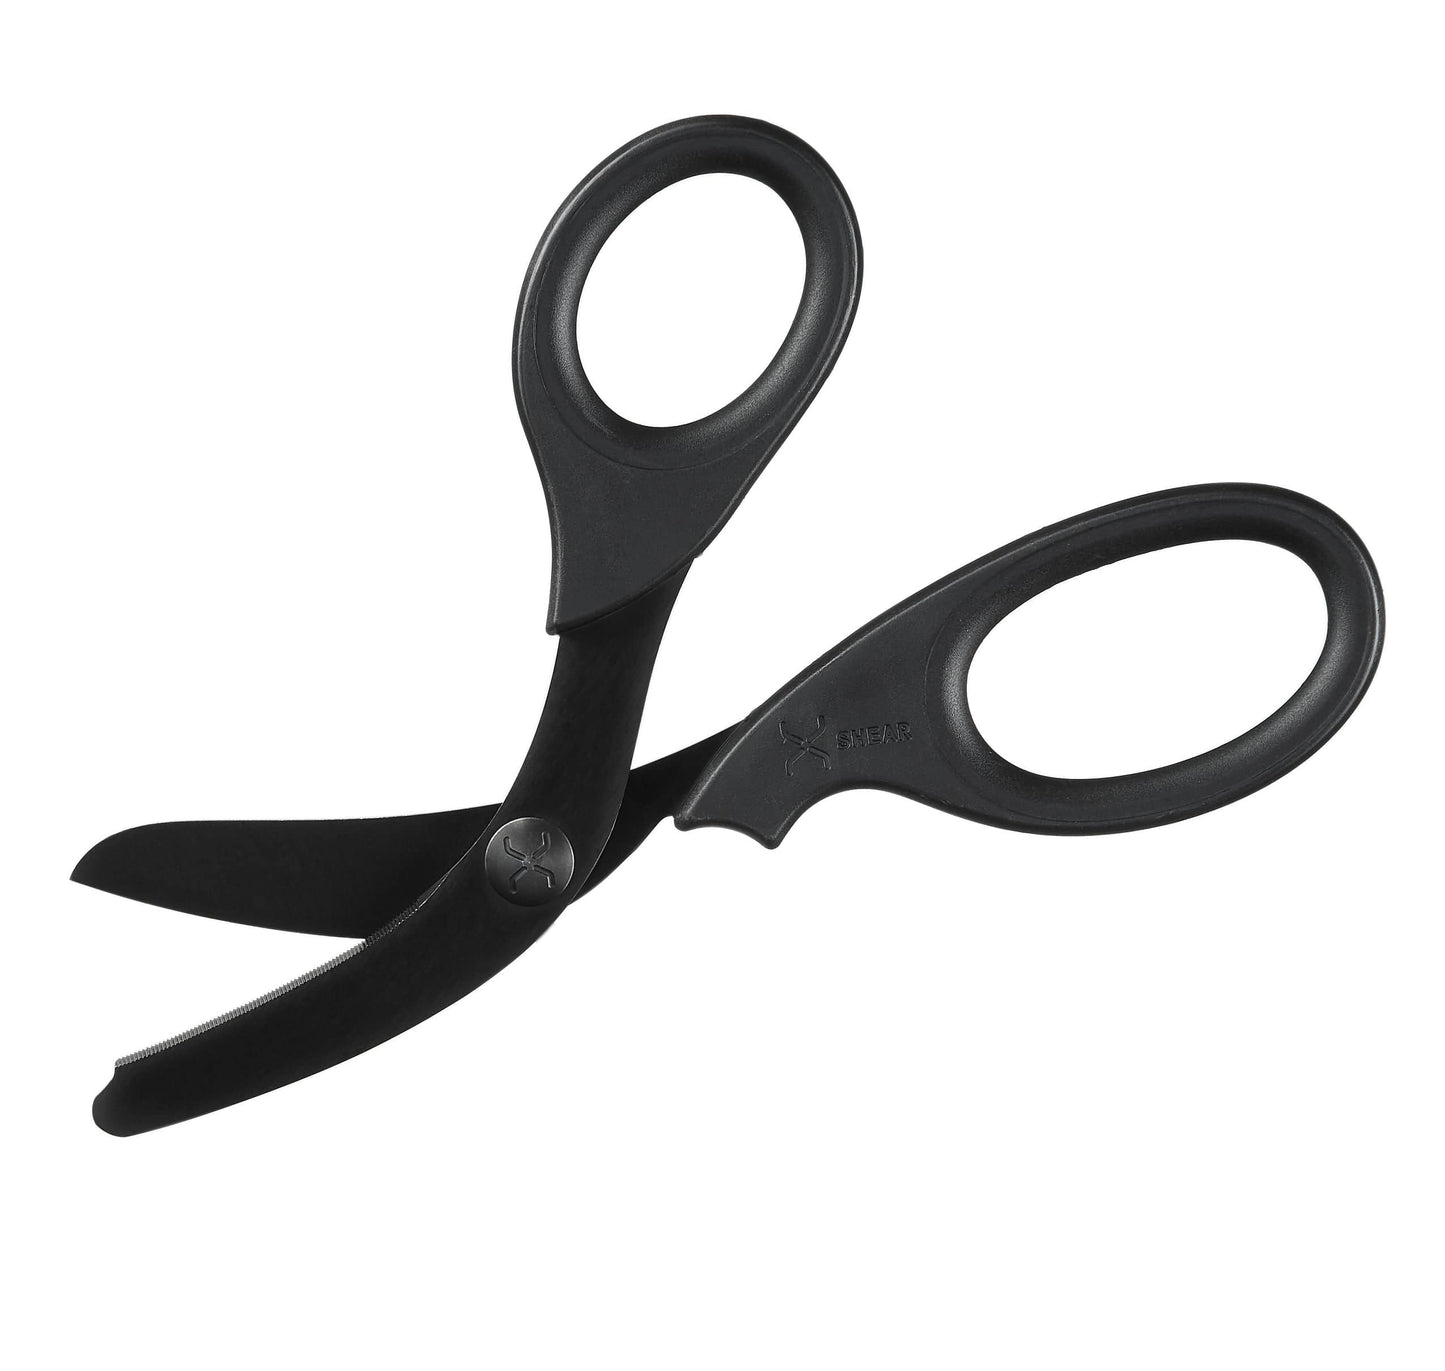 Chief Miller Shears XShear 7.5” Heavy Duty Trauma Shears. All Black Handles, Black Titanium Coated Stainless Steel Blades, For the Professional Emergency Provider Apparel